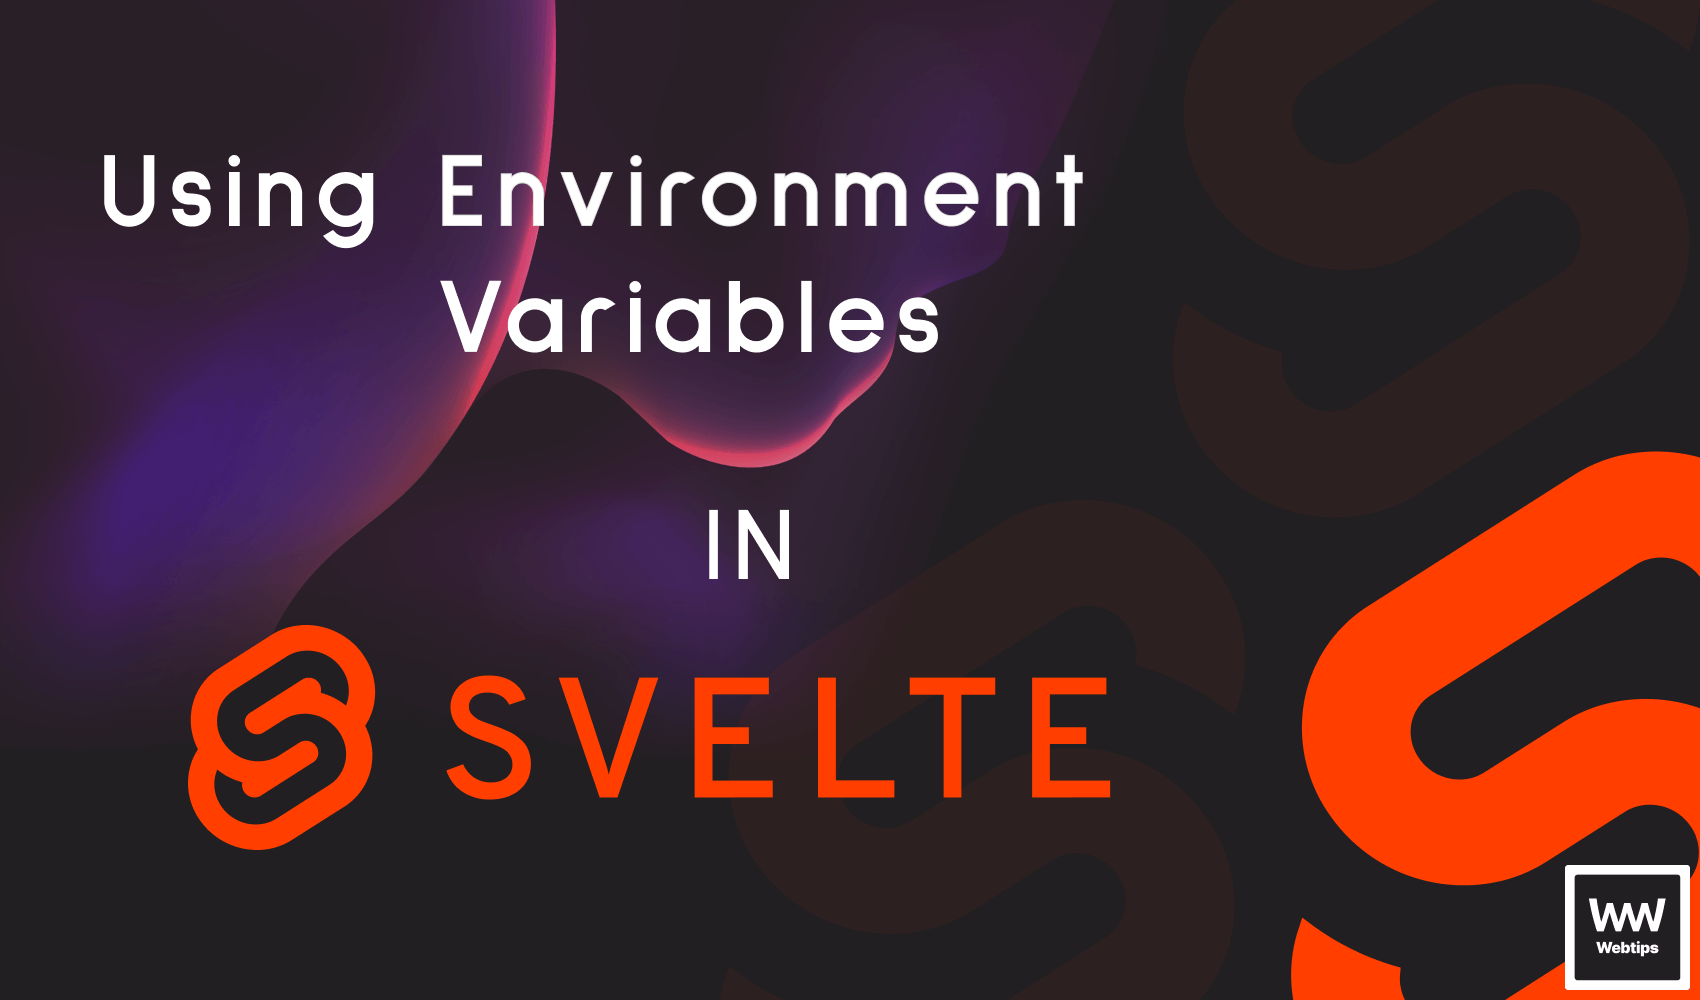 The Quick Way to Add Env Variables to Svelte using Vite